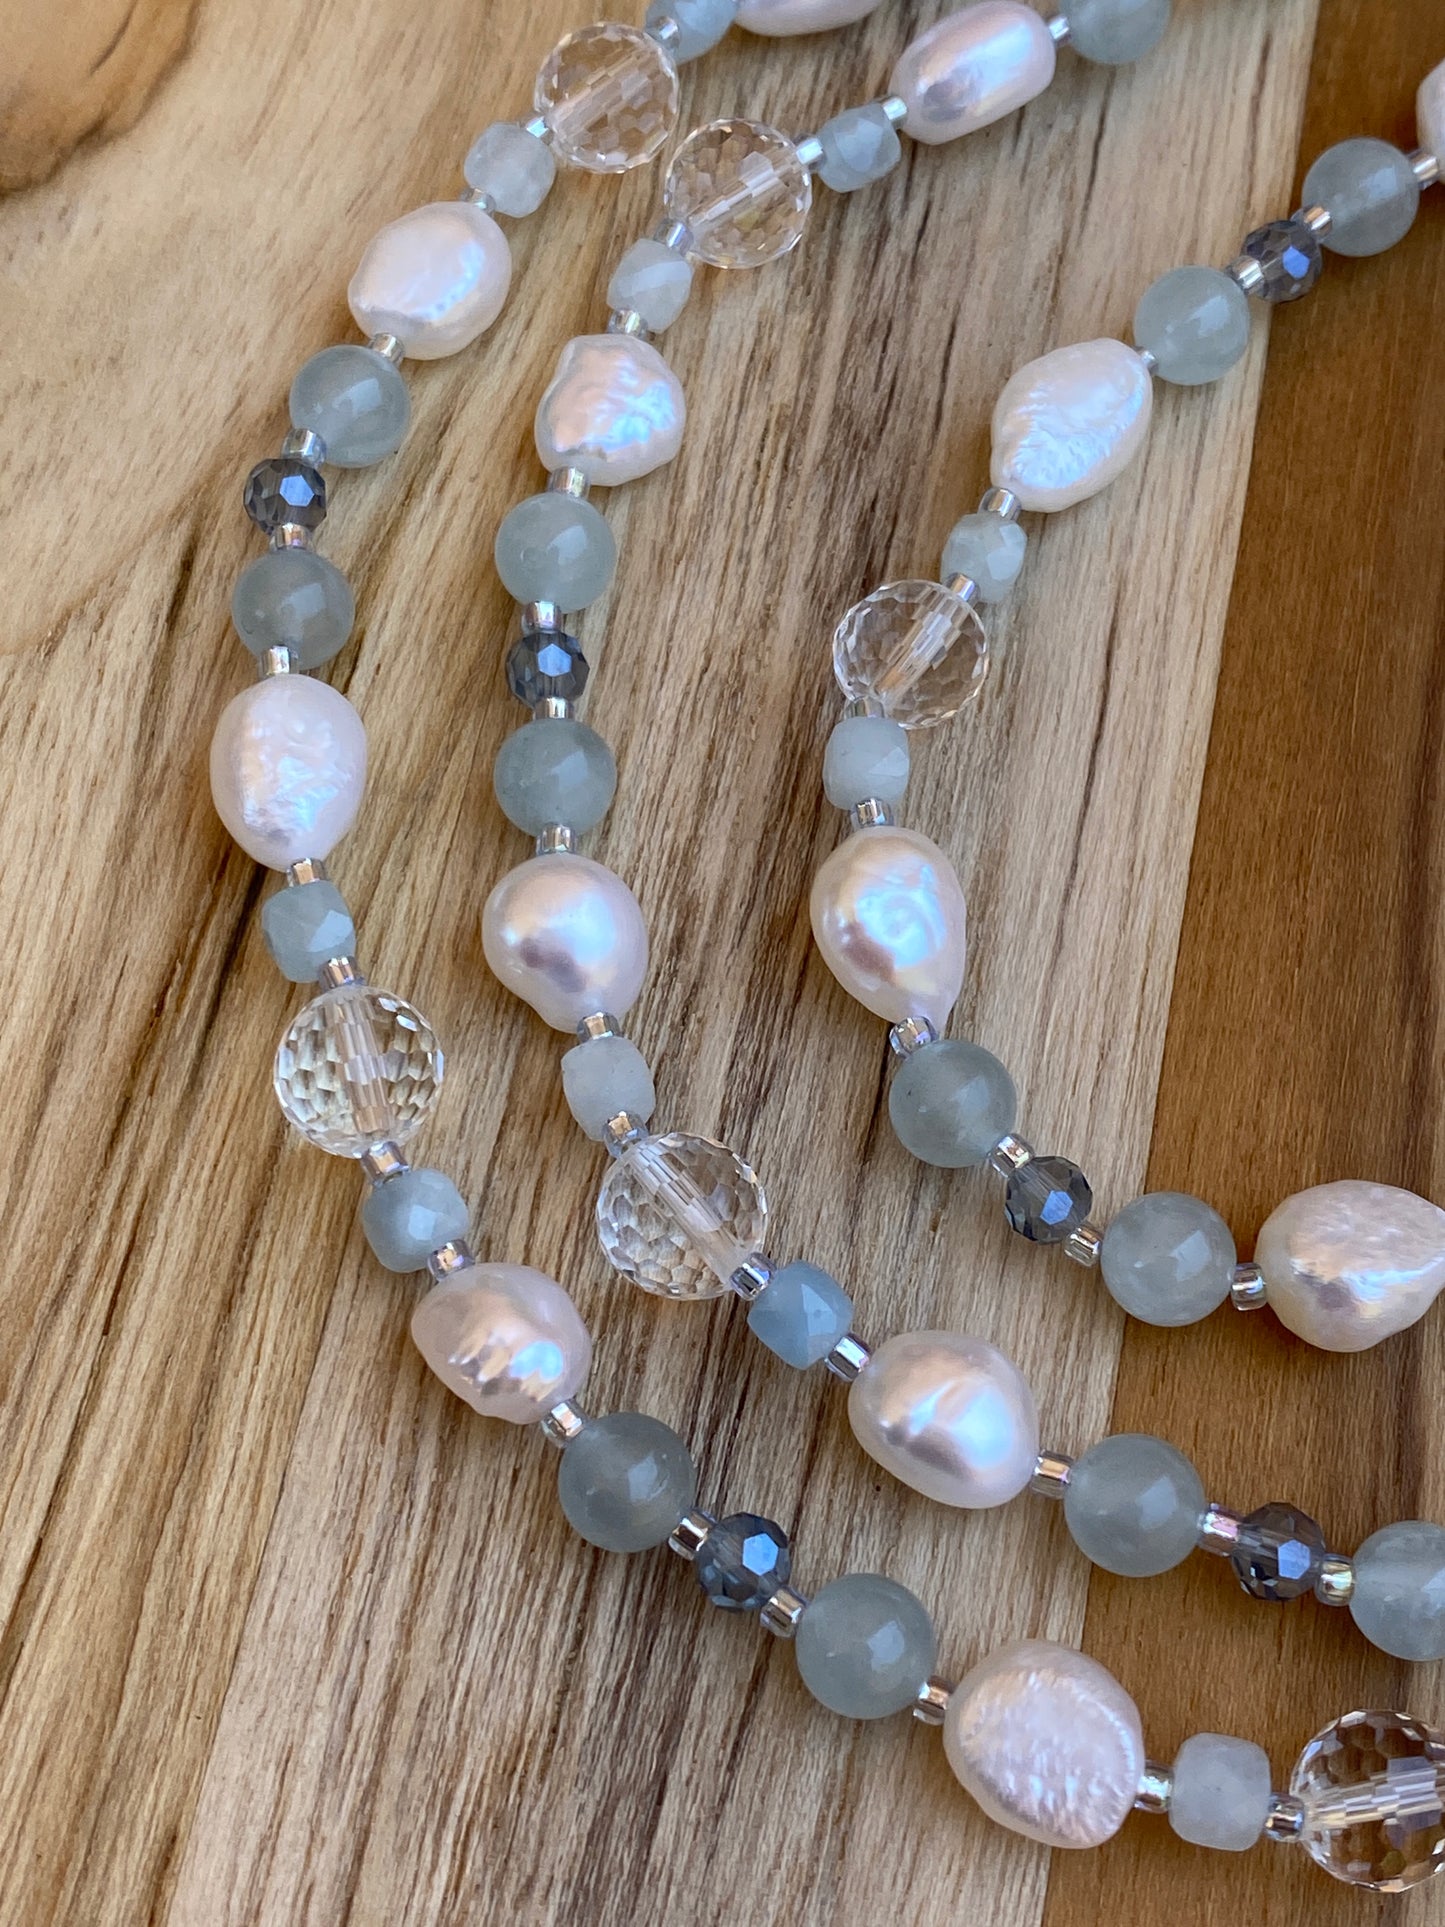 Extra Long Wraparound Style Necklace with Clear Quartz Aquamarine and White Baroque Pearls